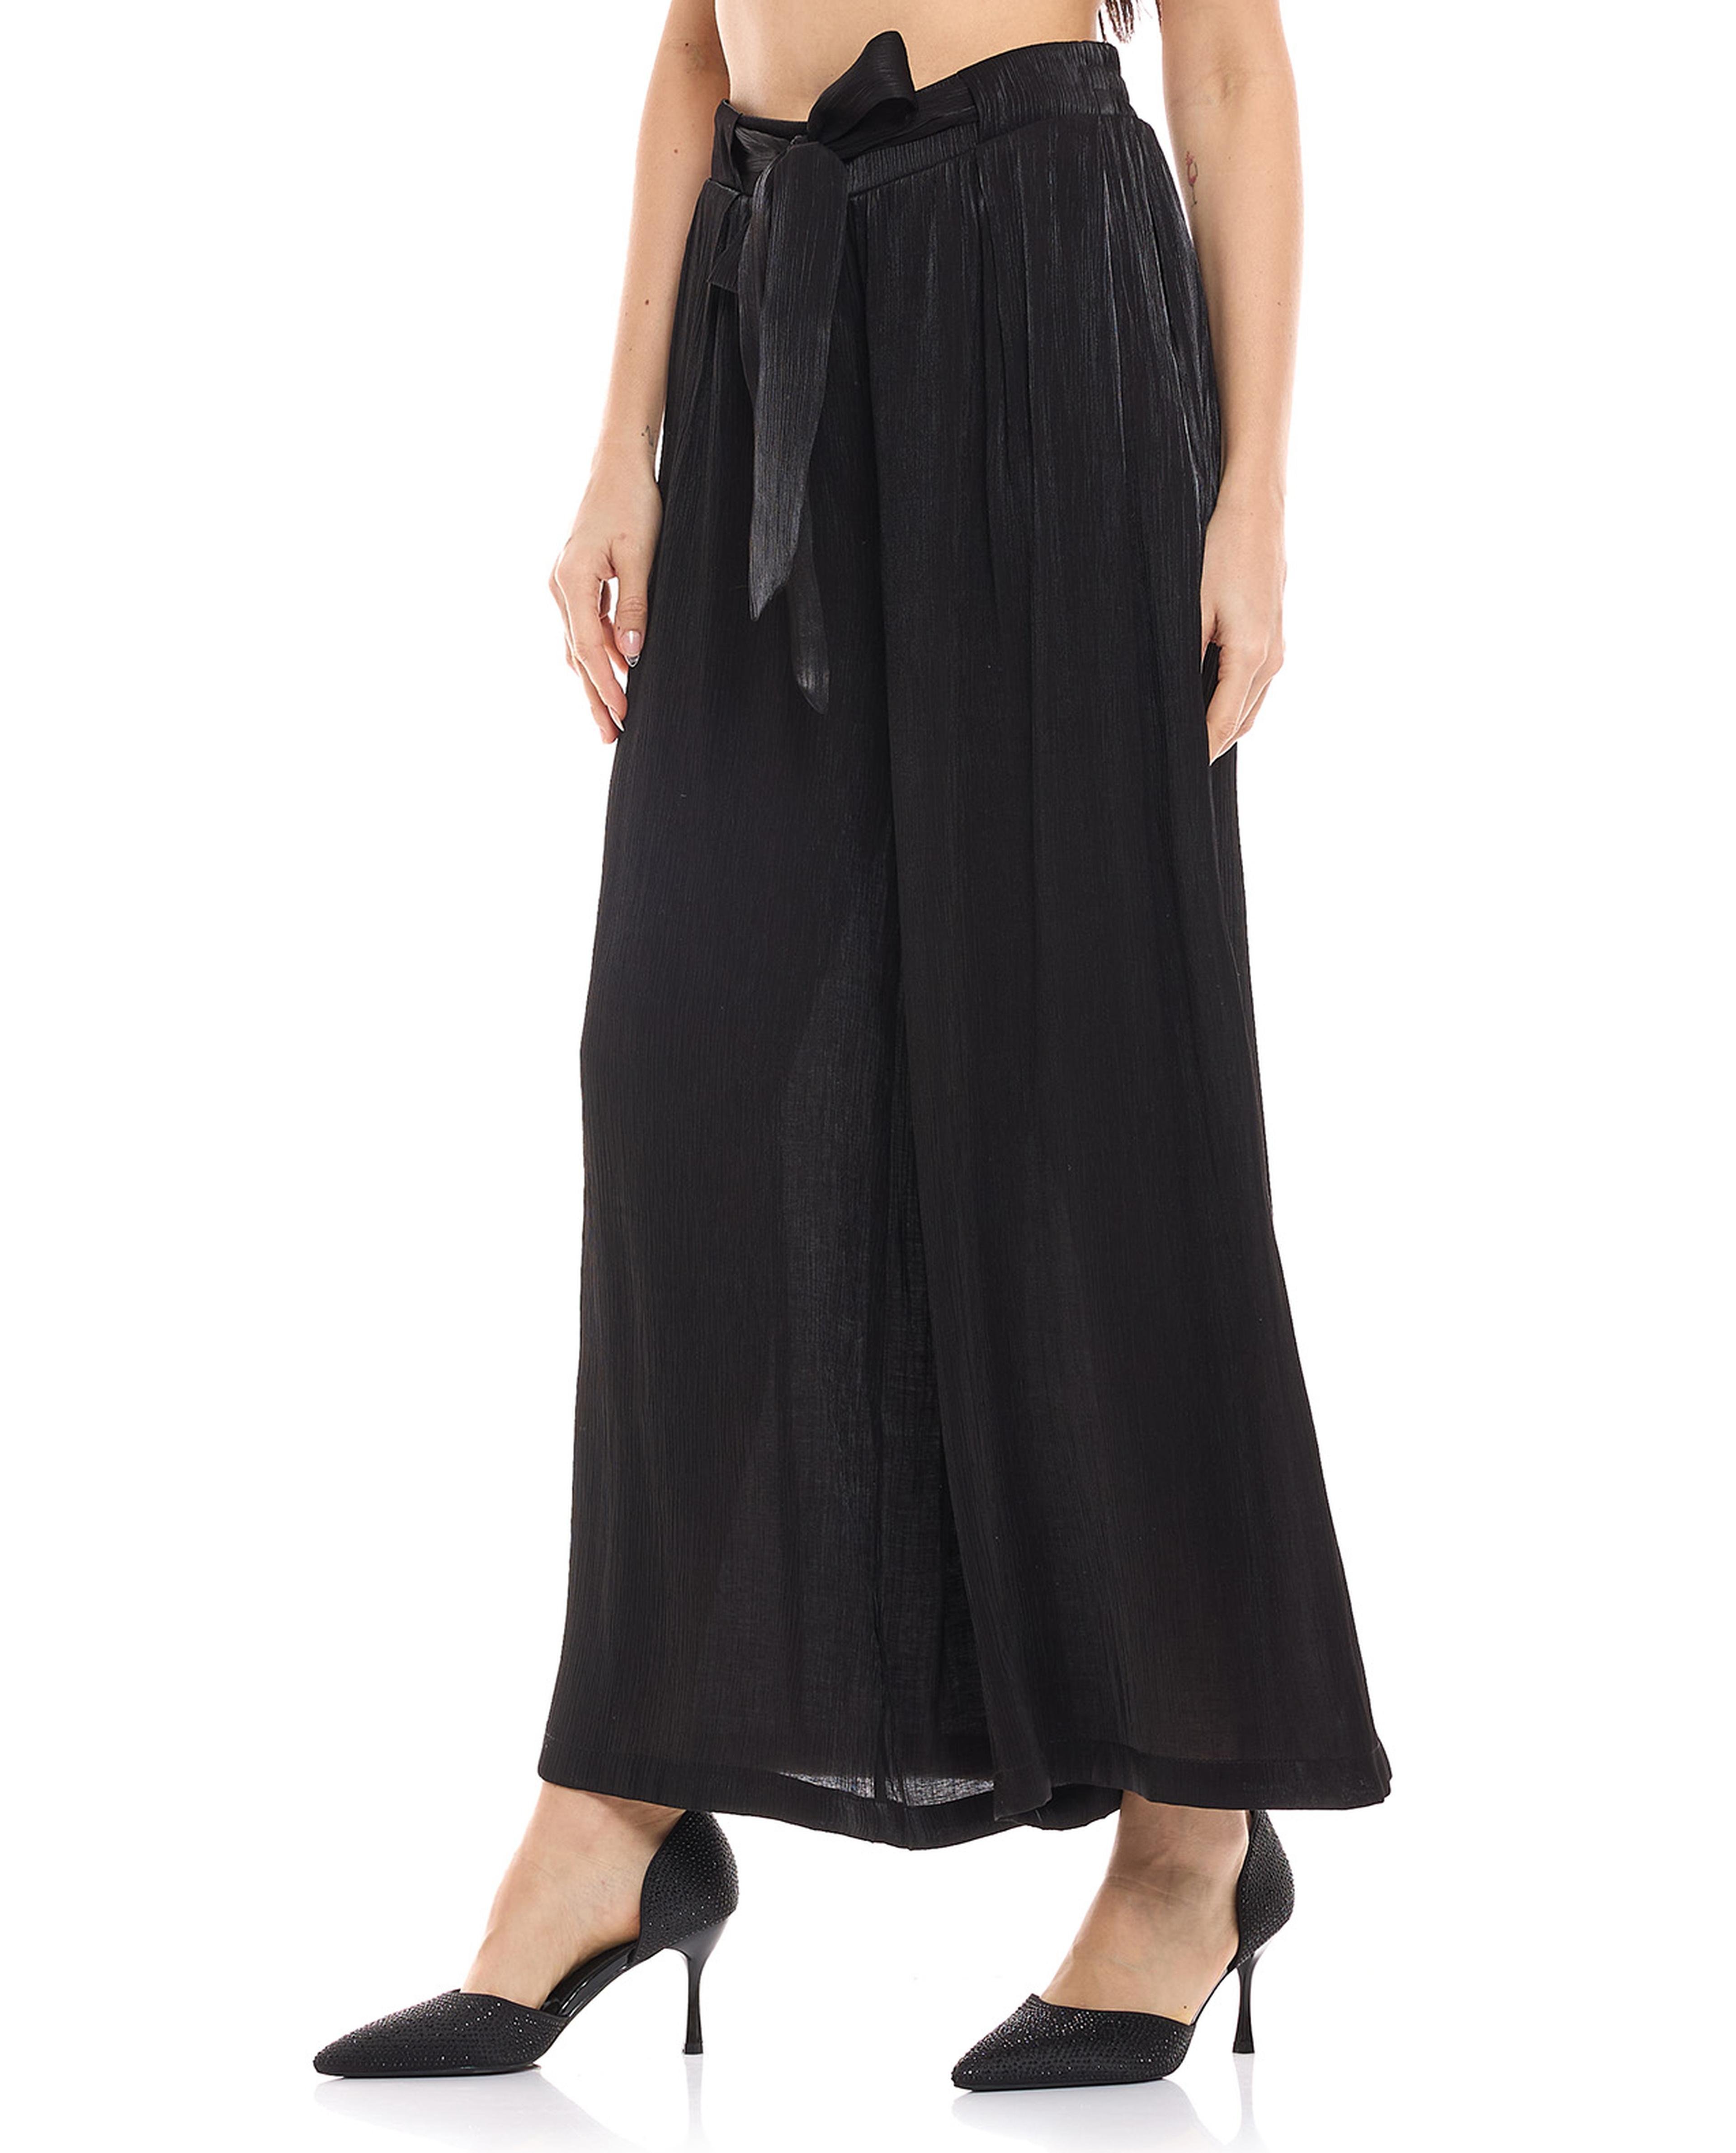 Shimmer Stripes Palazzo Pants with Elastic Waist